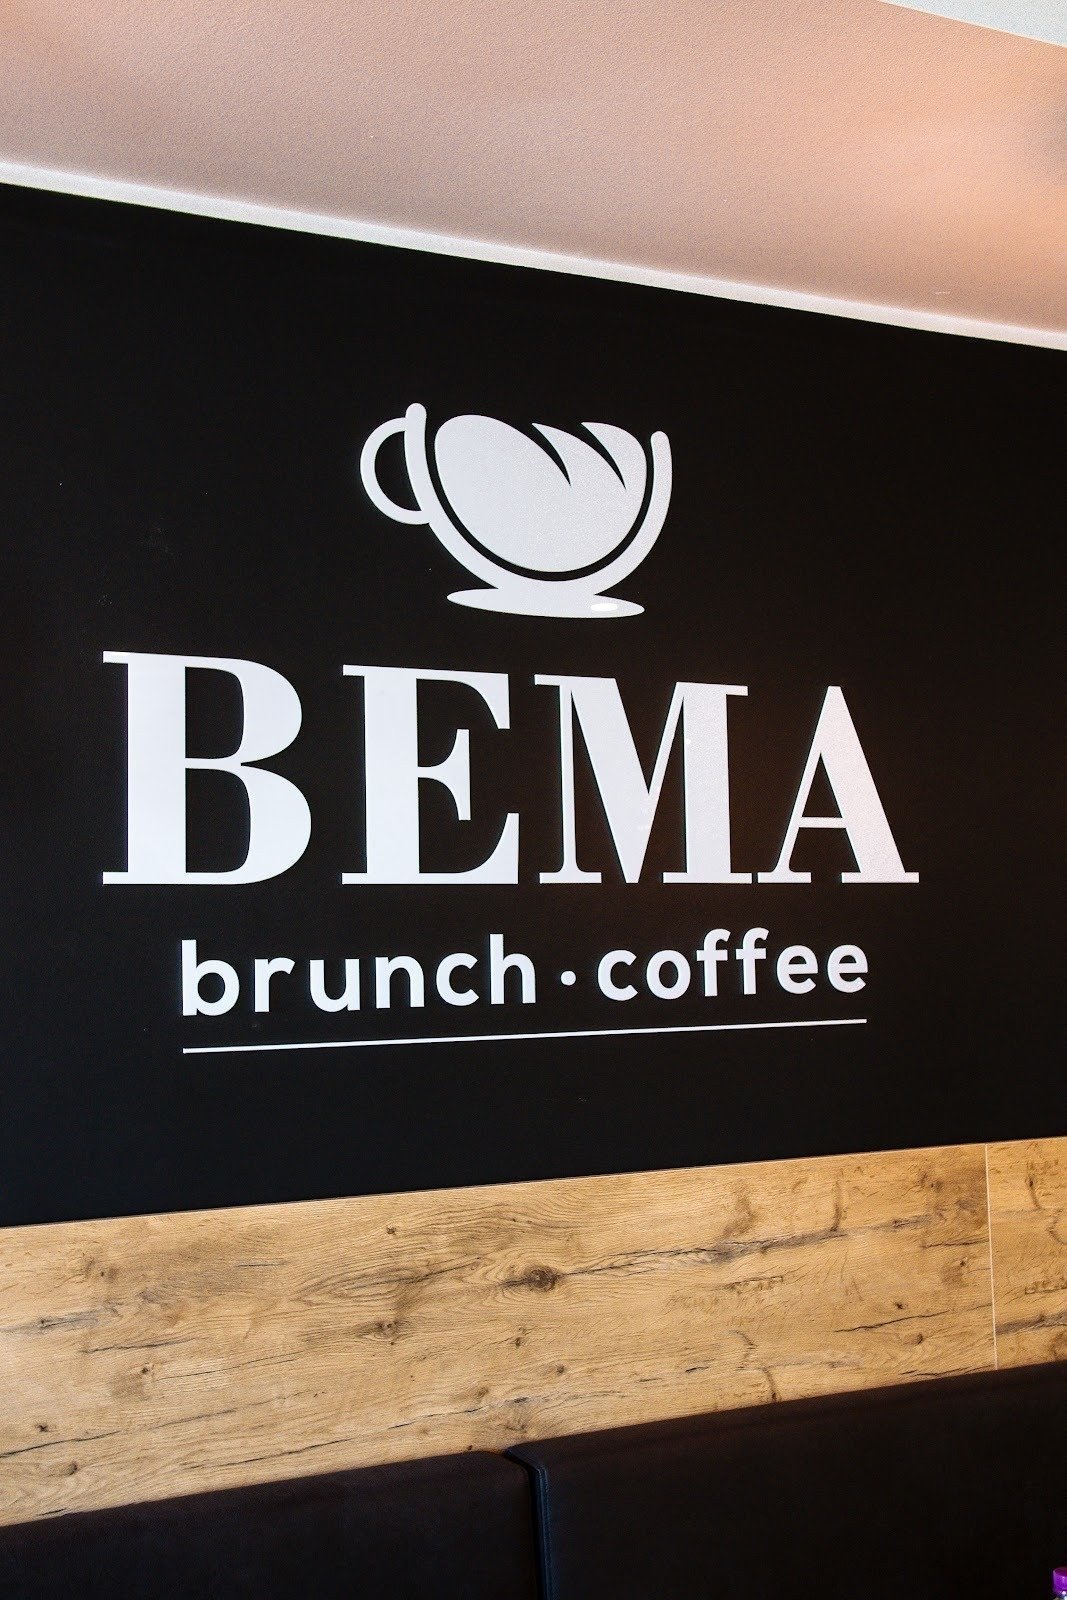 <span class="translation_missing" title="translation missing: en.meta.location_title, location_name: BEMA brunch•coffee, city: Aveiro">Location Title</span>